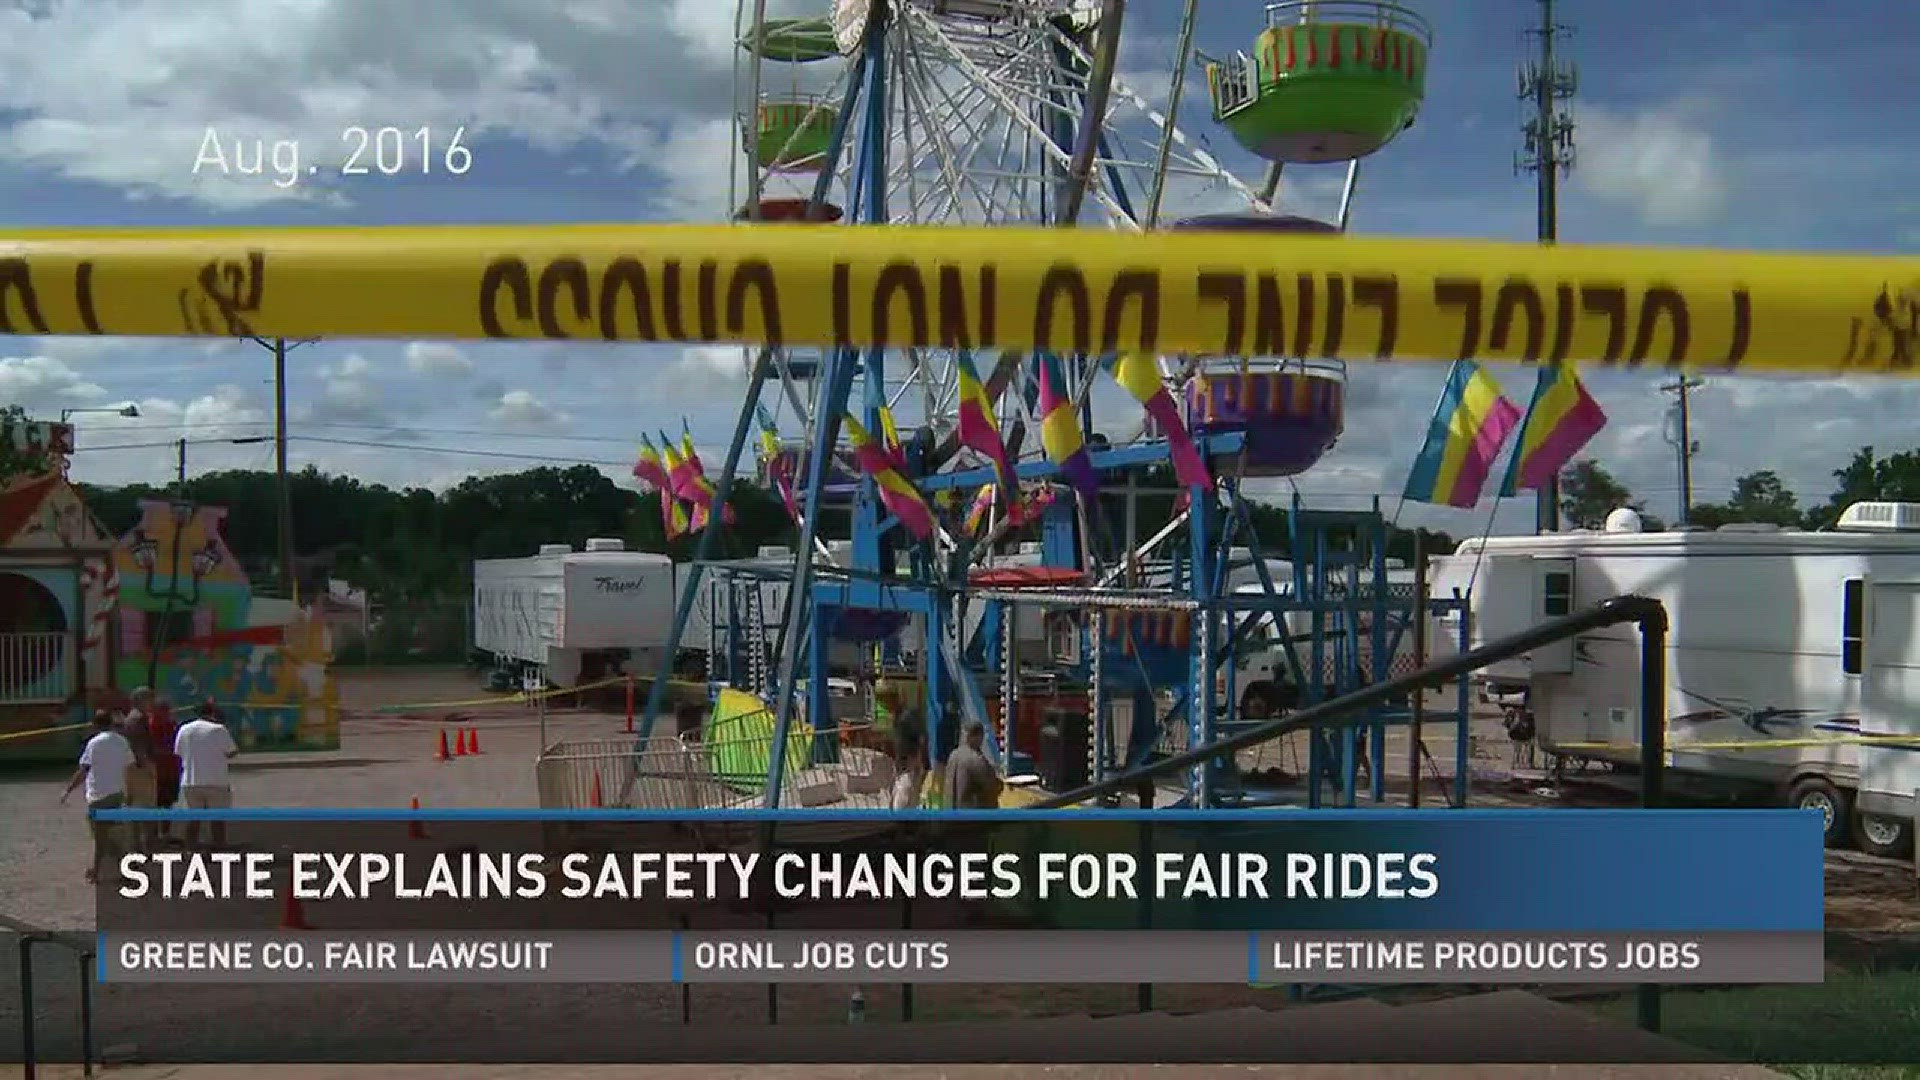 Aug. 8, 2017: As the rides open at the Greene County Fair, state leaders are highlighting safety changes they've made for all local fairs in the last year.